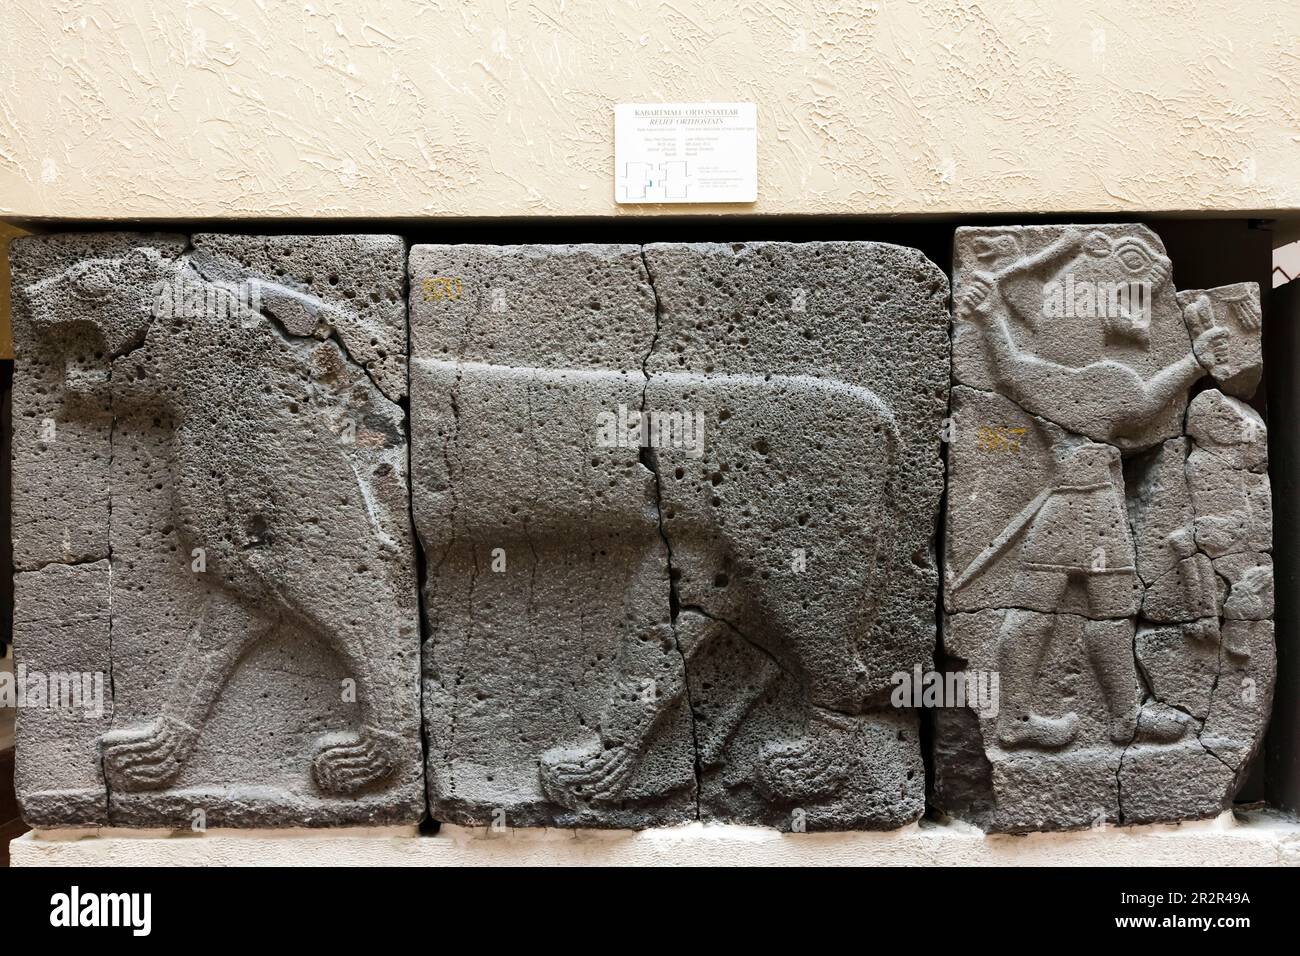 Relief orthostats, from Sam'al (Gaziantep), 9th cent.B.C., late hittite reriod, Istanbul Archaeology Museums, Istanbul, Turkey Stock Photo